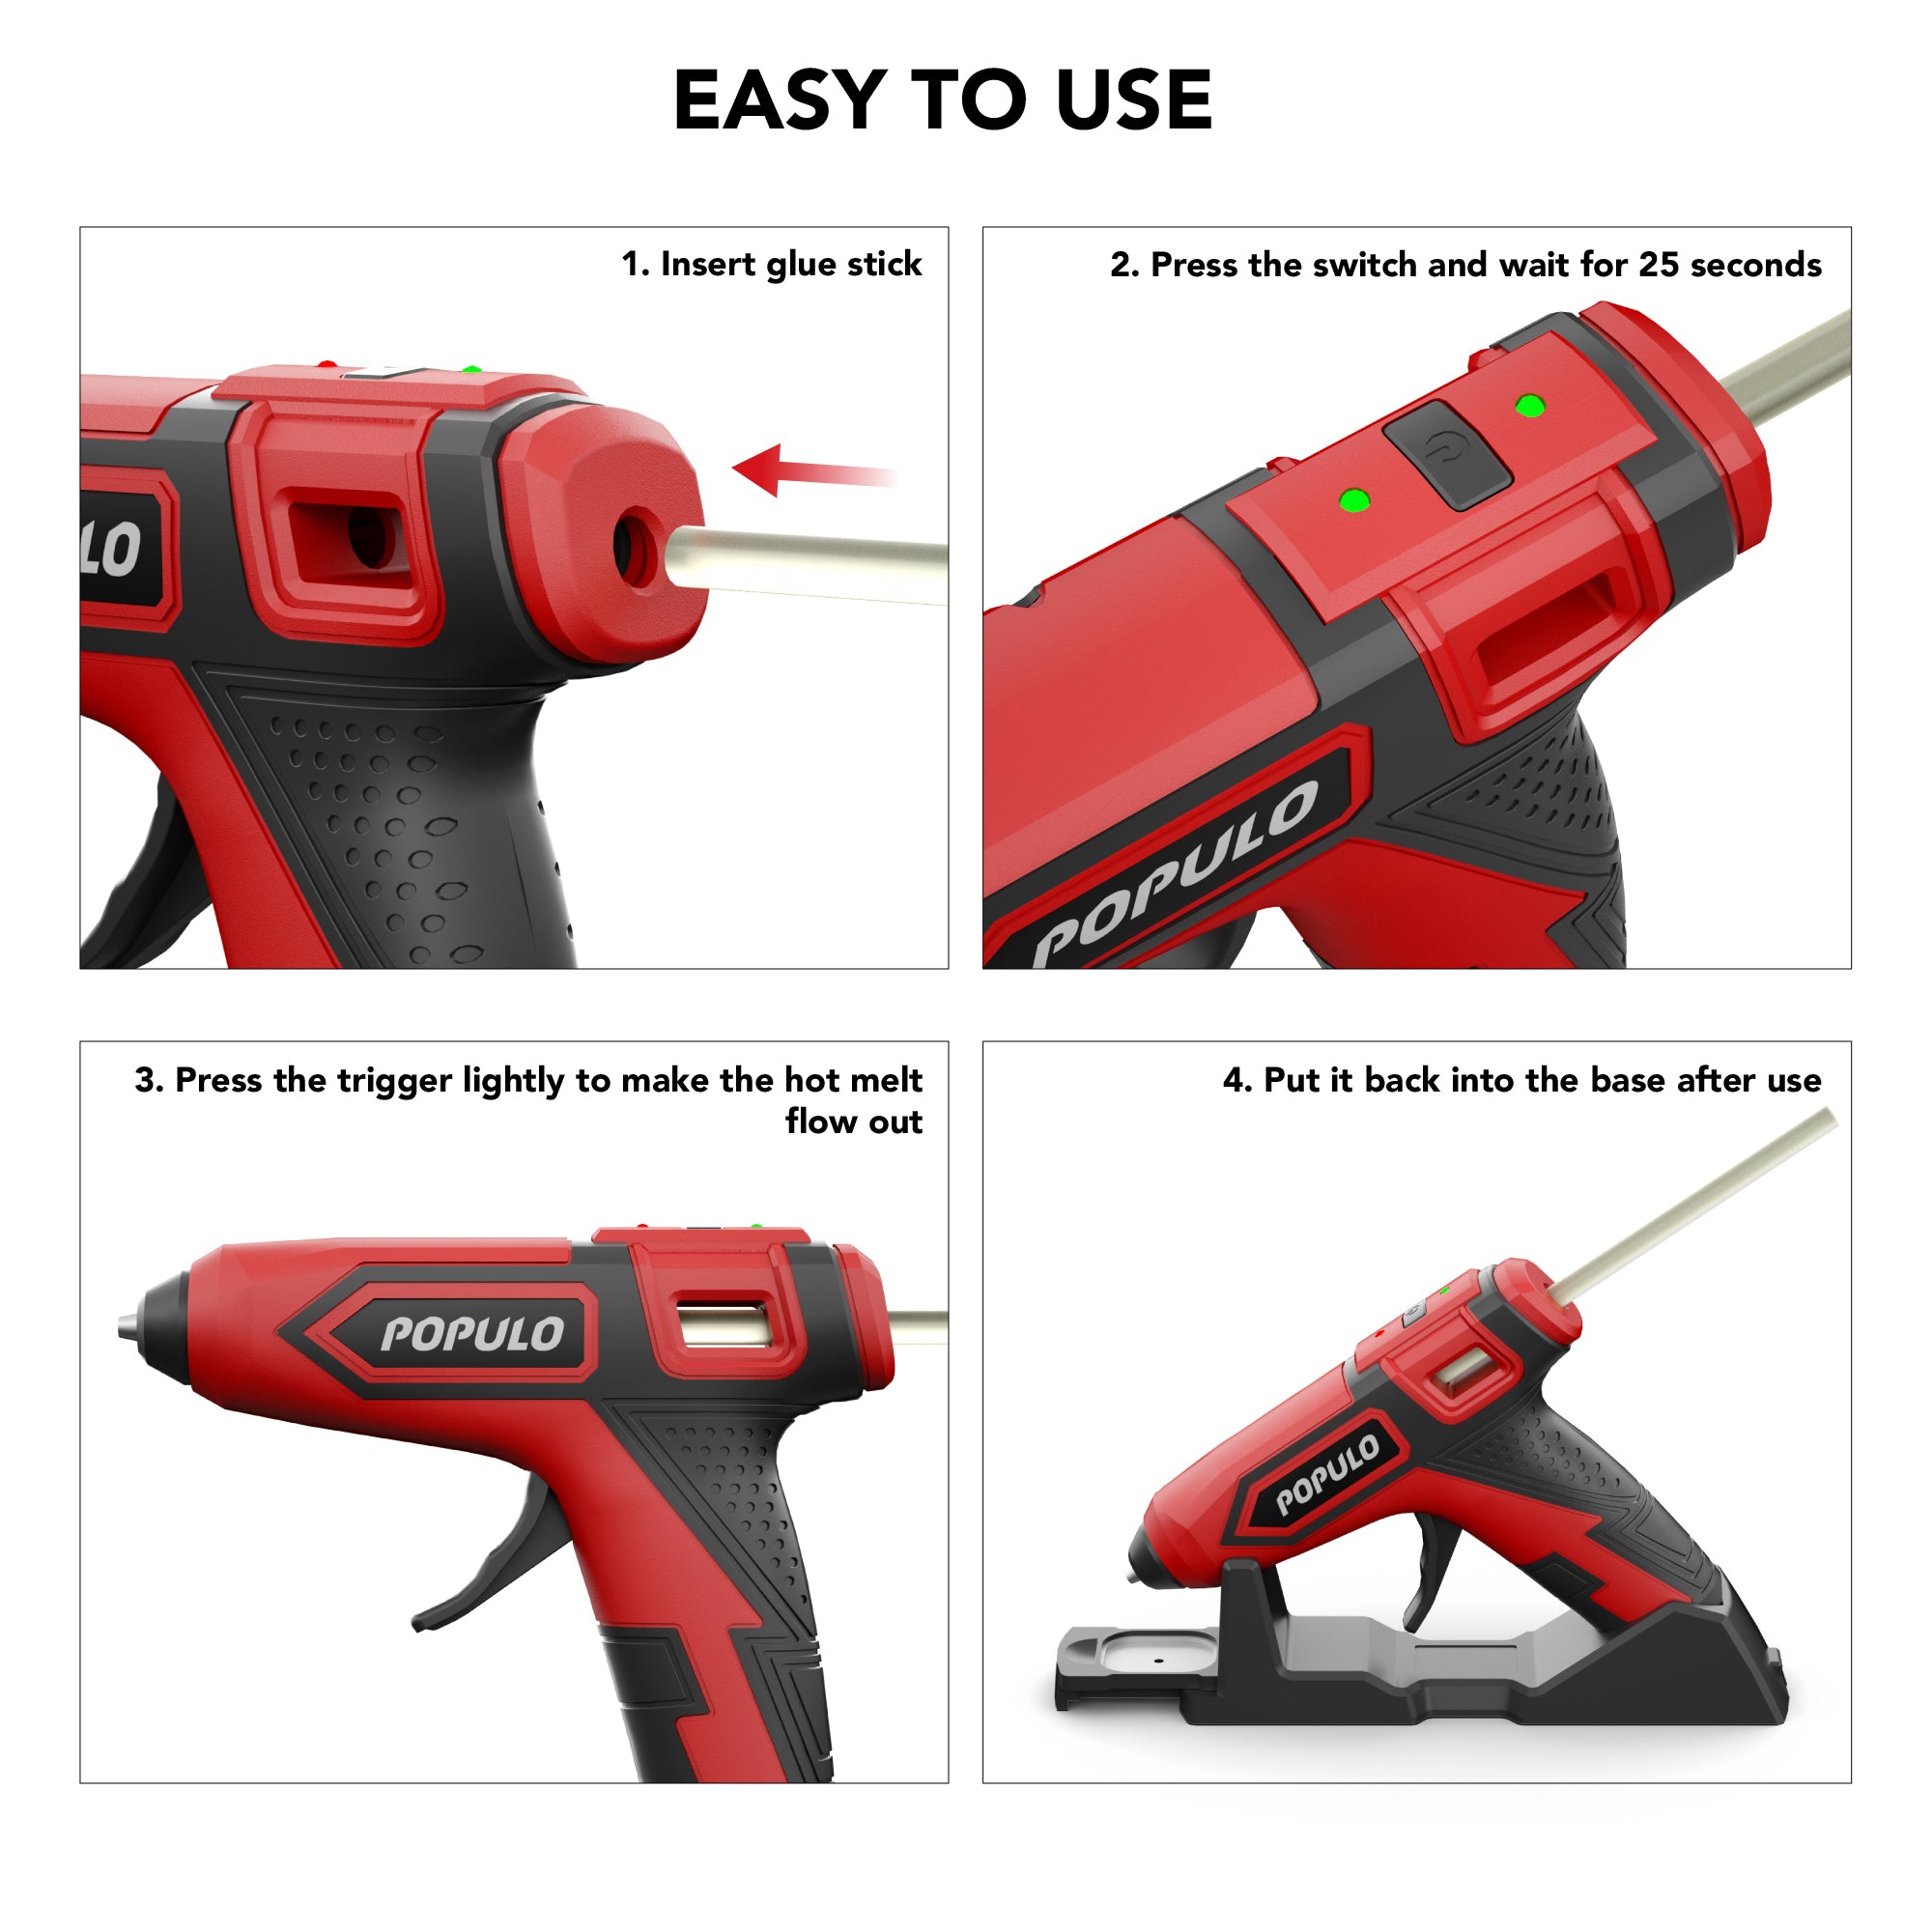 USB Rechargeable Hot Melt Cordless Glue Gun (70515) Comes with Glue Sticks  (4Pcs 150mm) and charging cable, Ideal for DIY Crafts & Repairs - Rolson  Tools